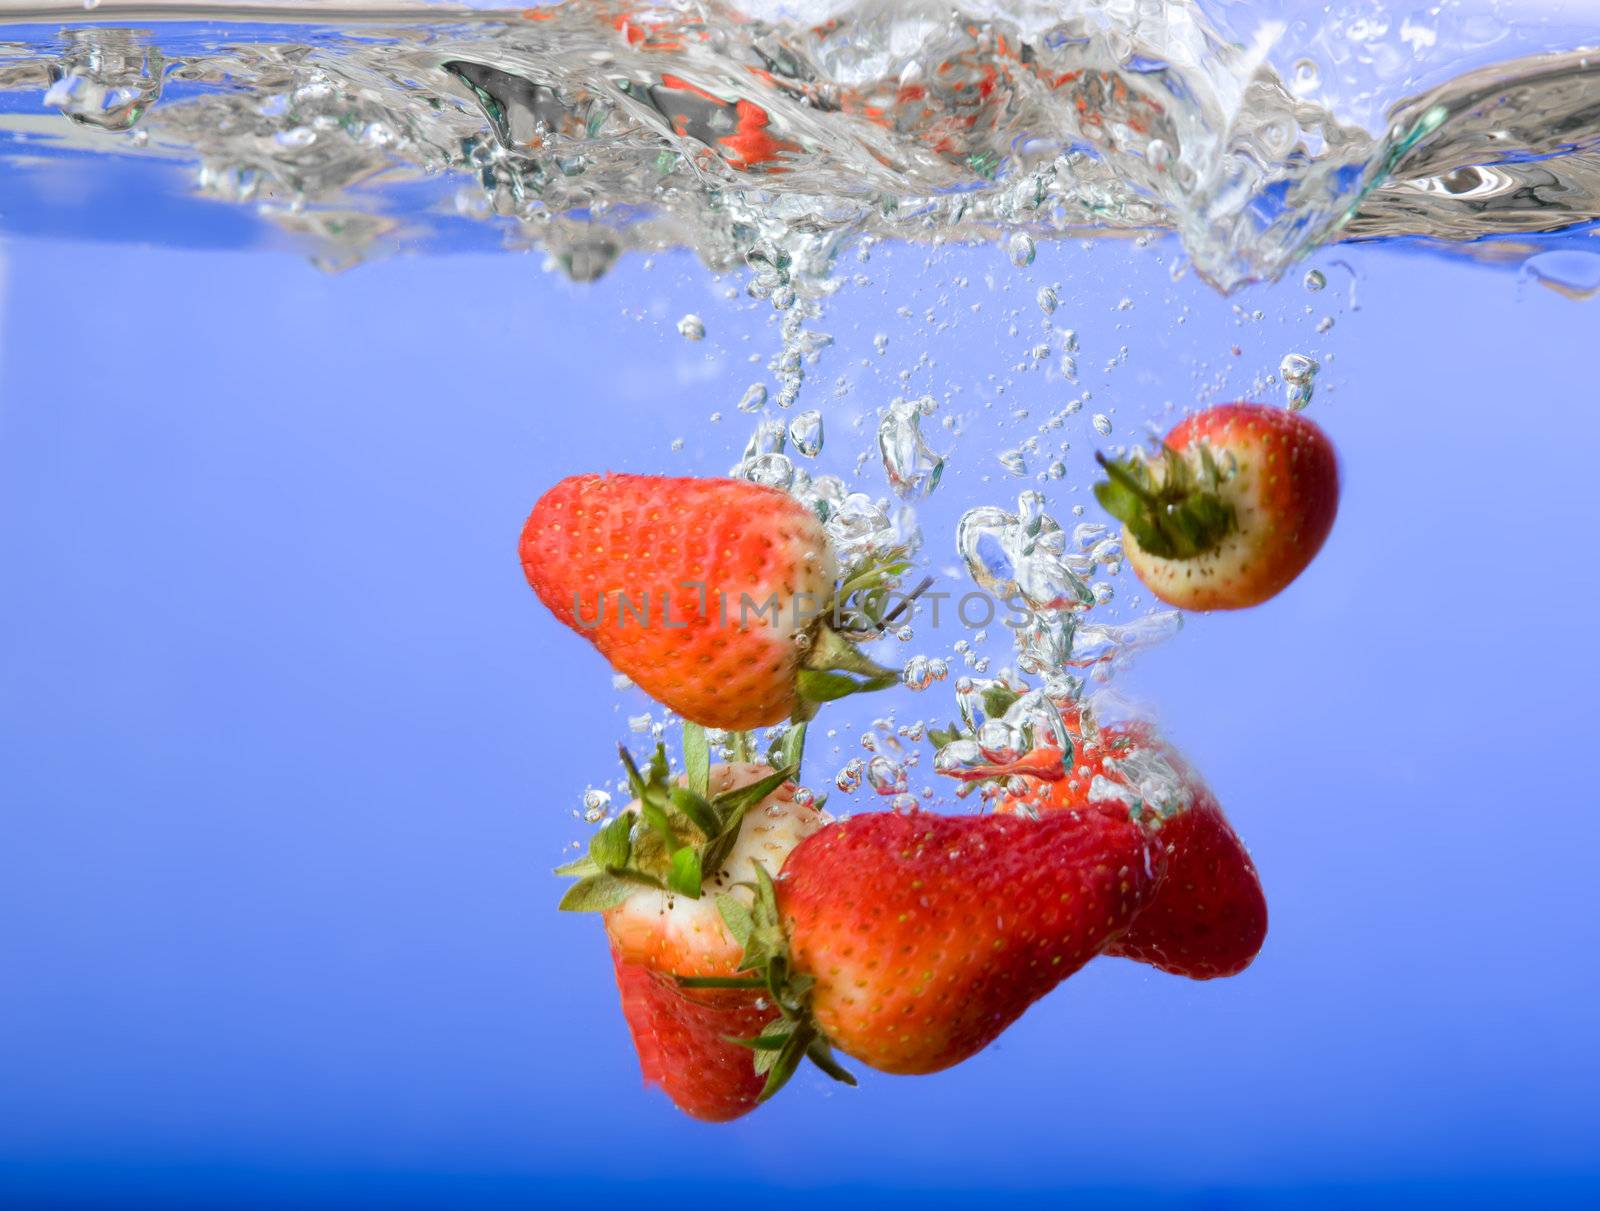 Strawberries falling in blue water with splash and bubbles